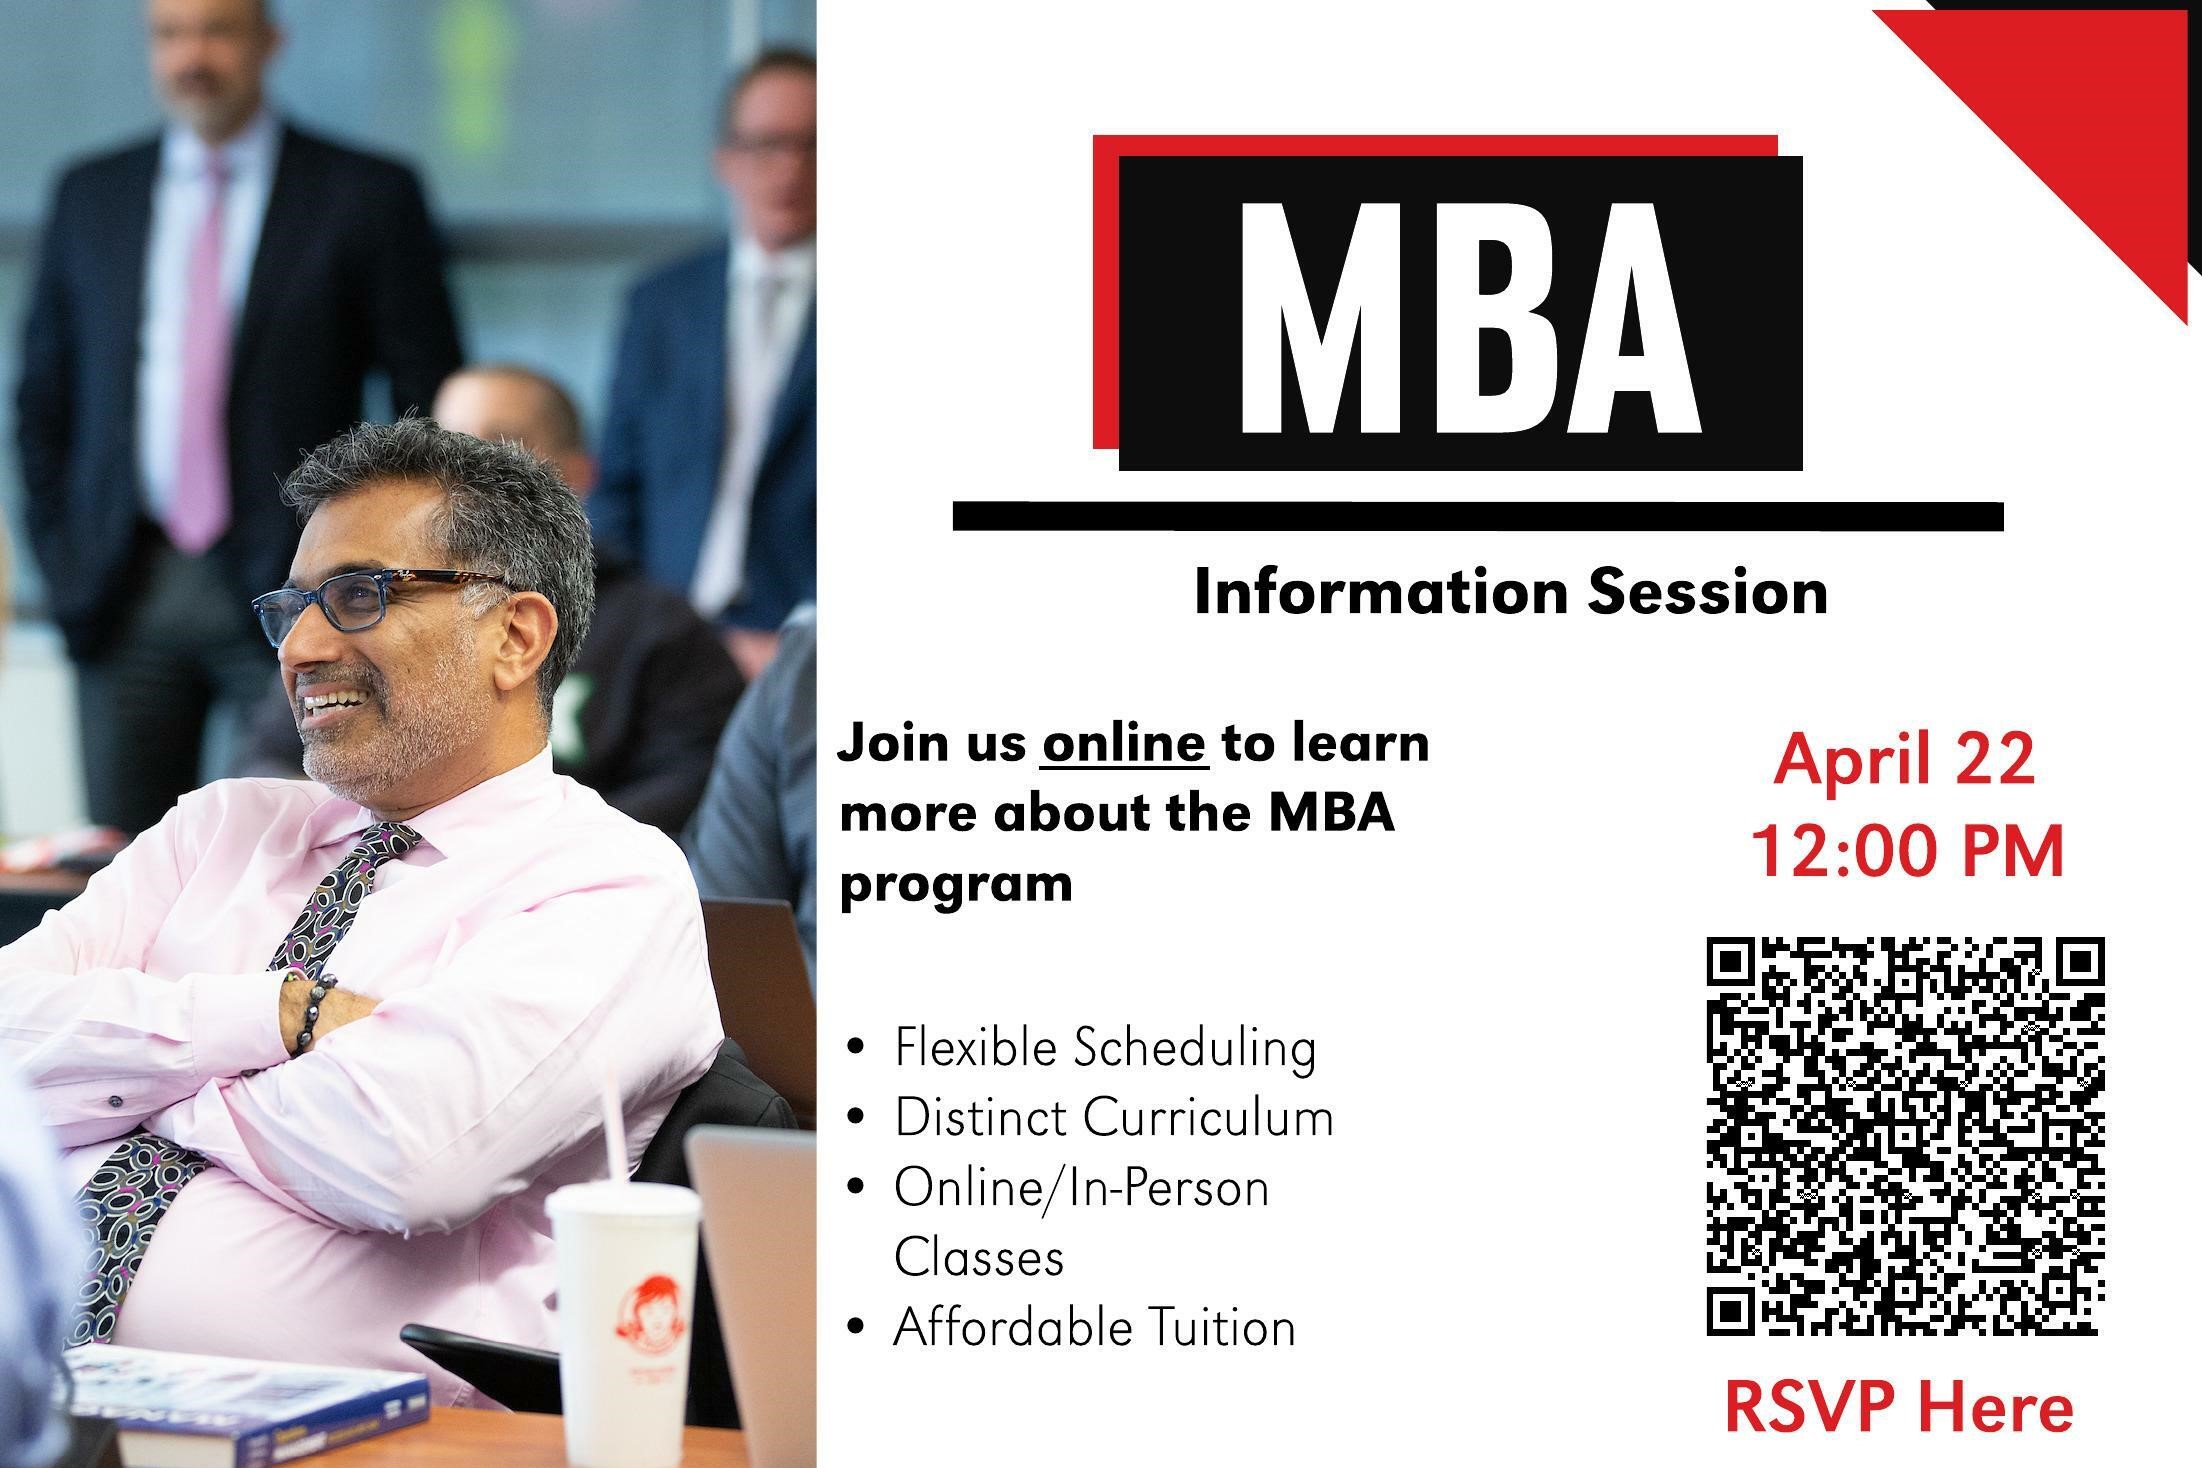 MBA Information session. Join us online to learn more about the MBA program on April 22nd at 12:00 PM CDT. The MBA Program features flexible scheduling, distinct curriculum, online/in-person classes, and affordable tuition.